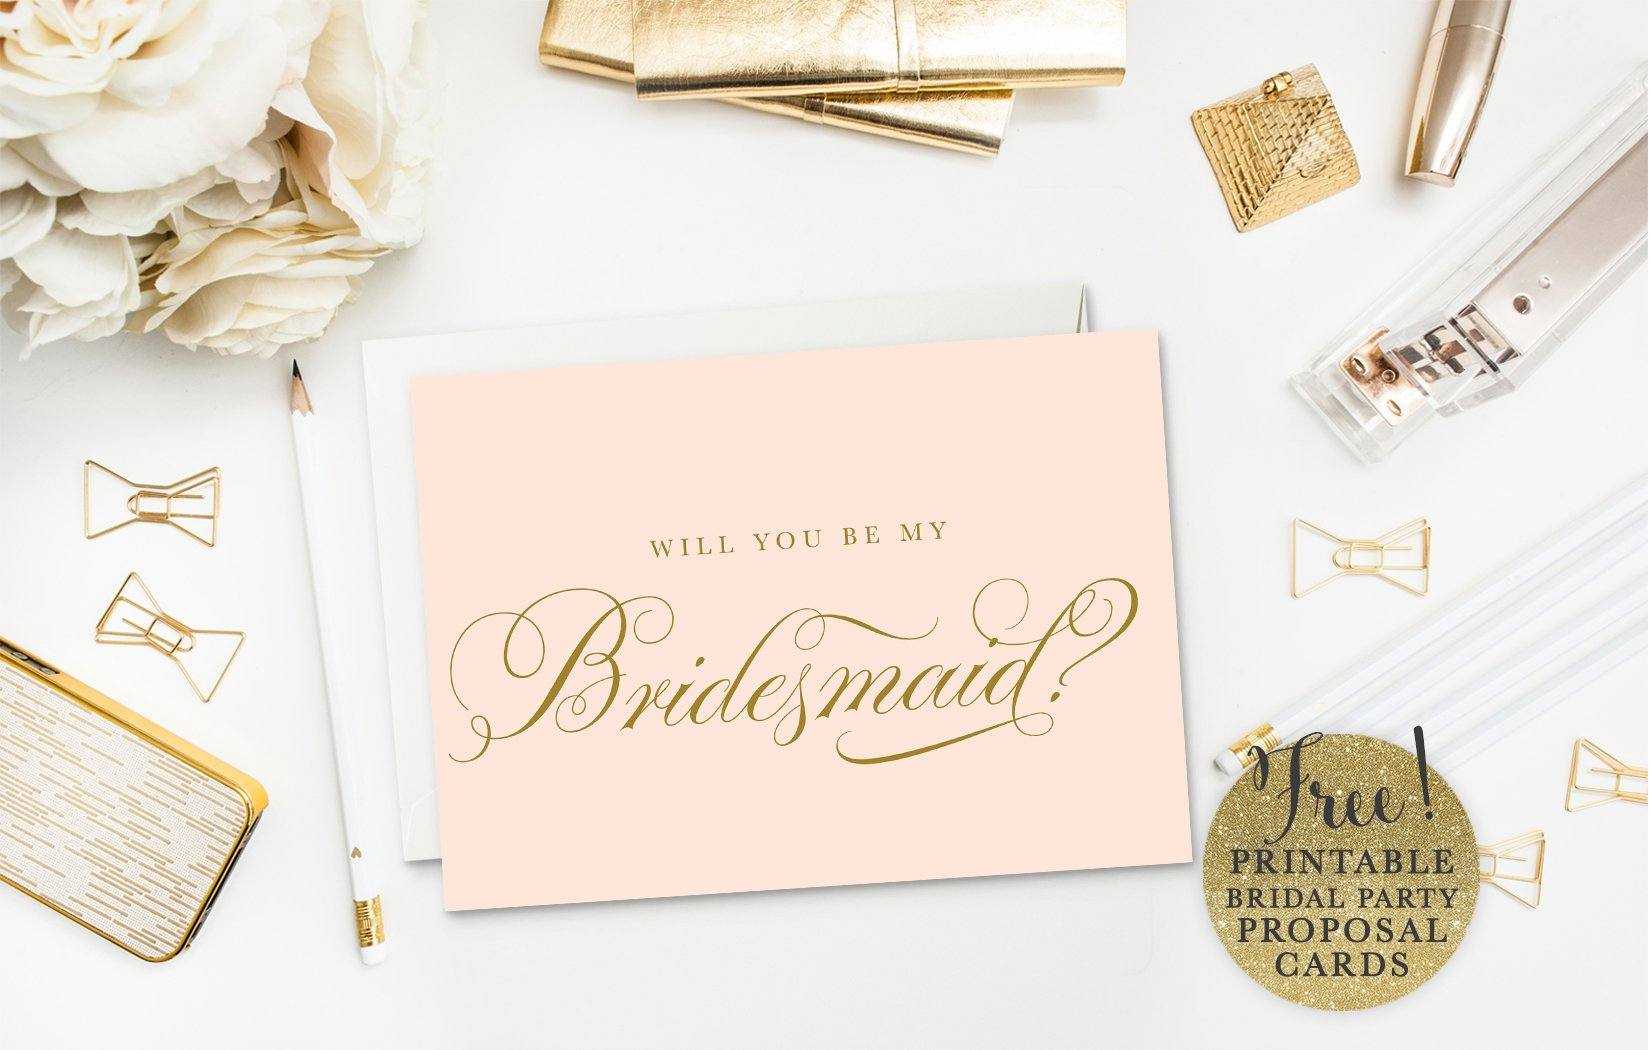 10 Will You Be My Bridesmaid? Cards (Free & Printable) Throughout Will You Be My Bridesmaid Card Template